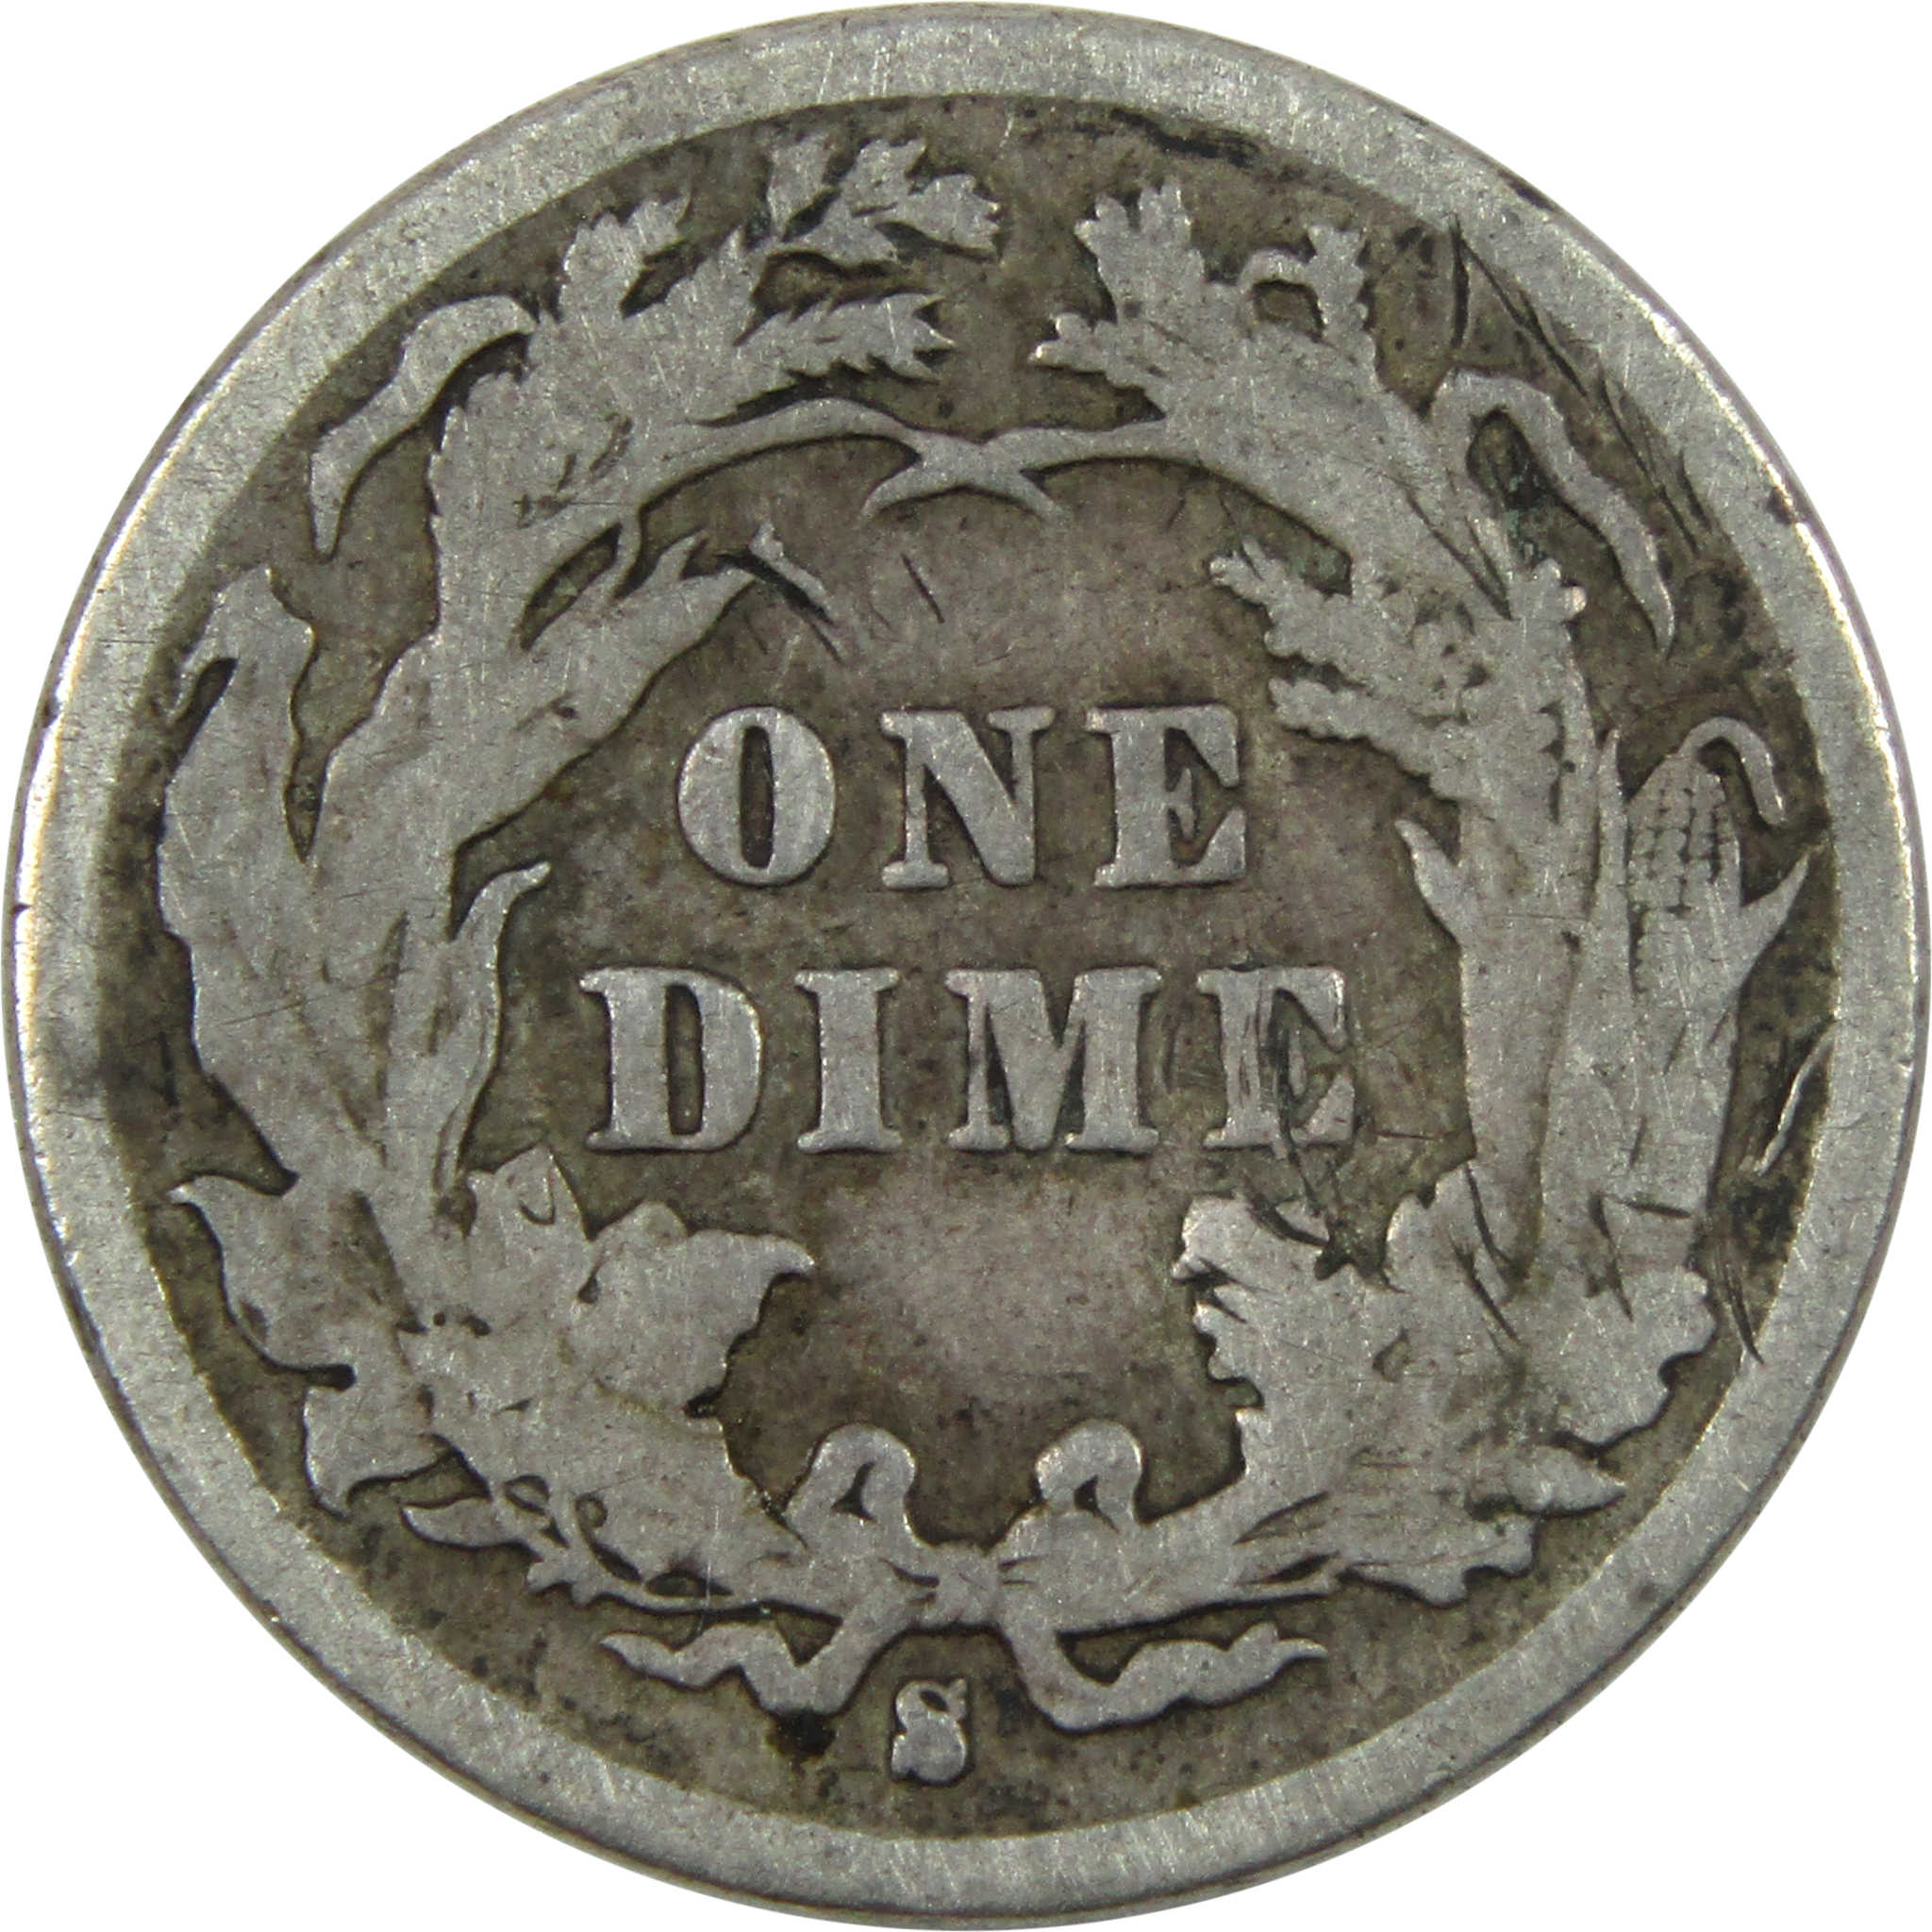 1887 S Seated Liberty Dime XF EF Extremely Fine Silver 10c SKU:I14061